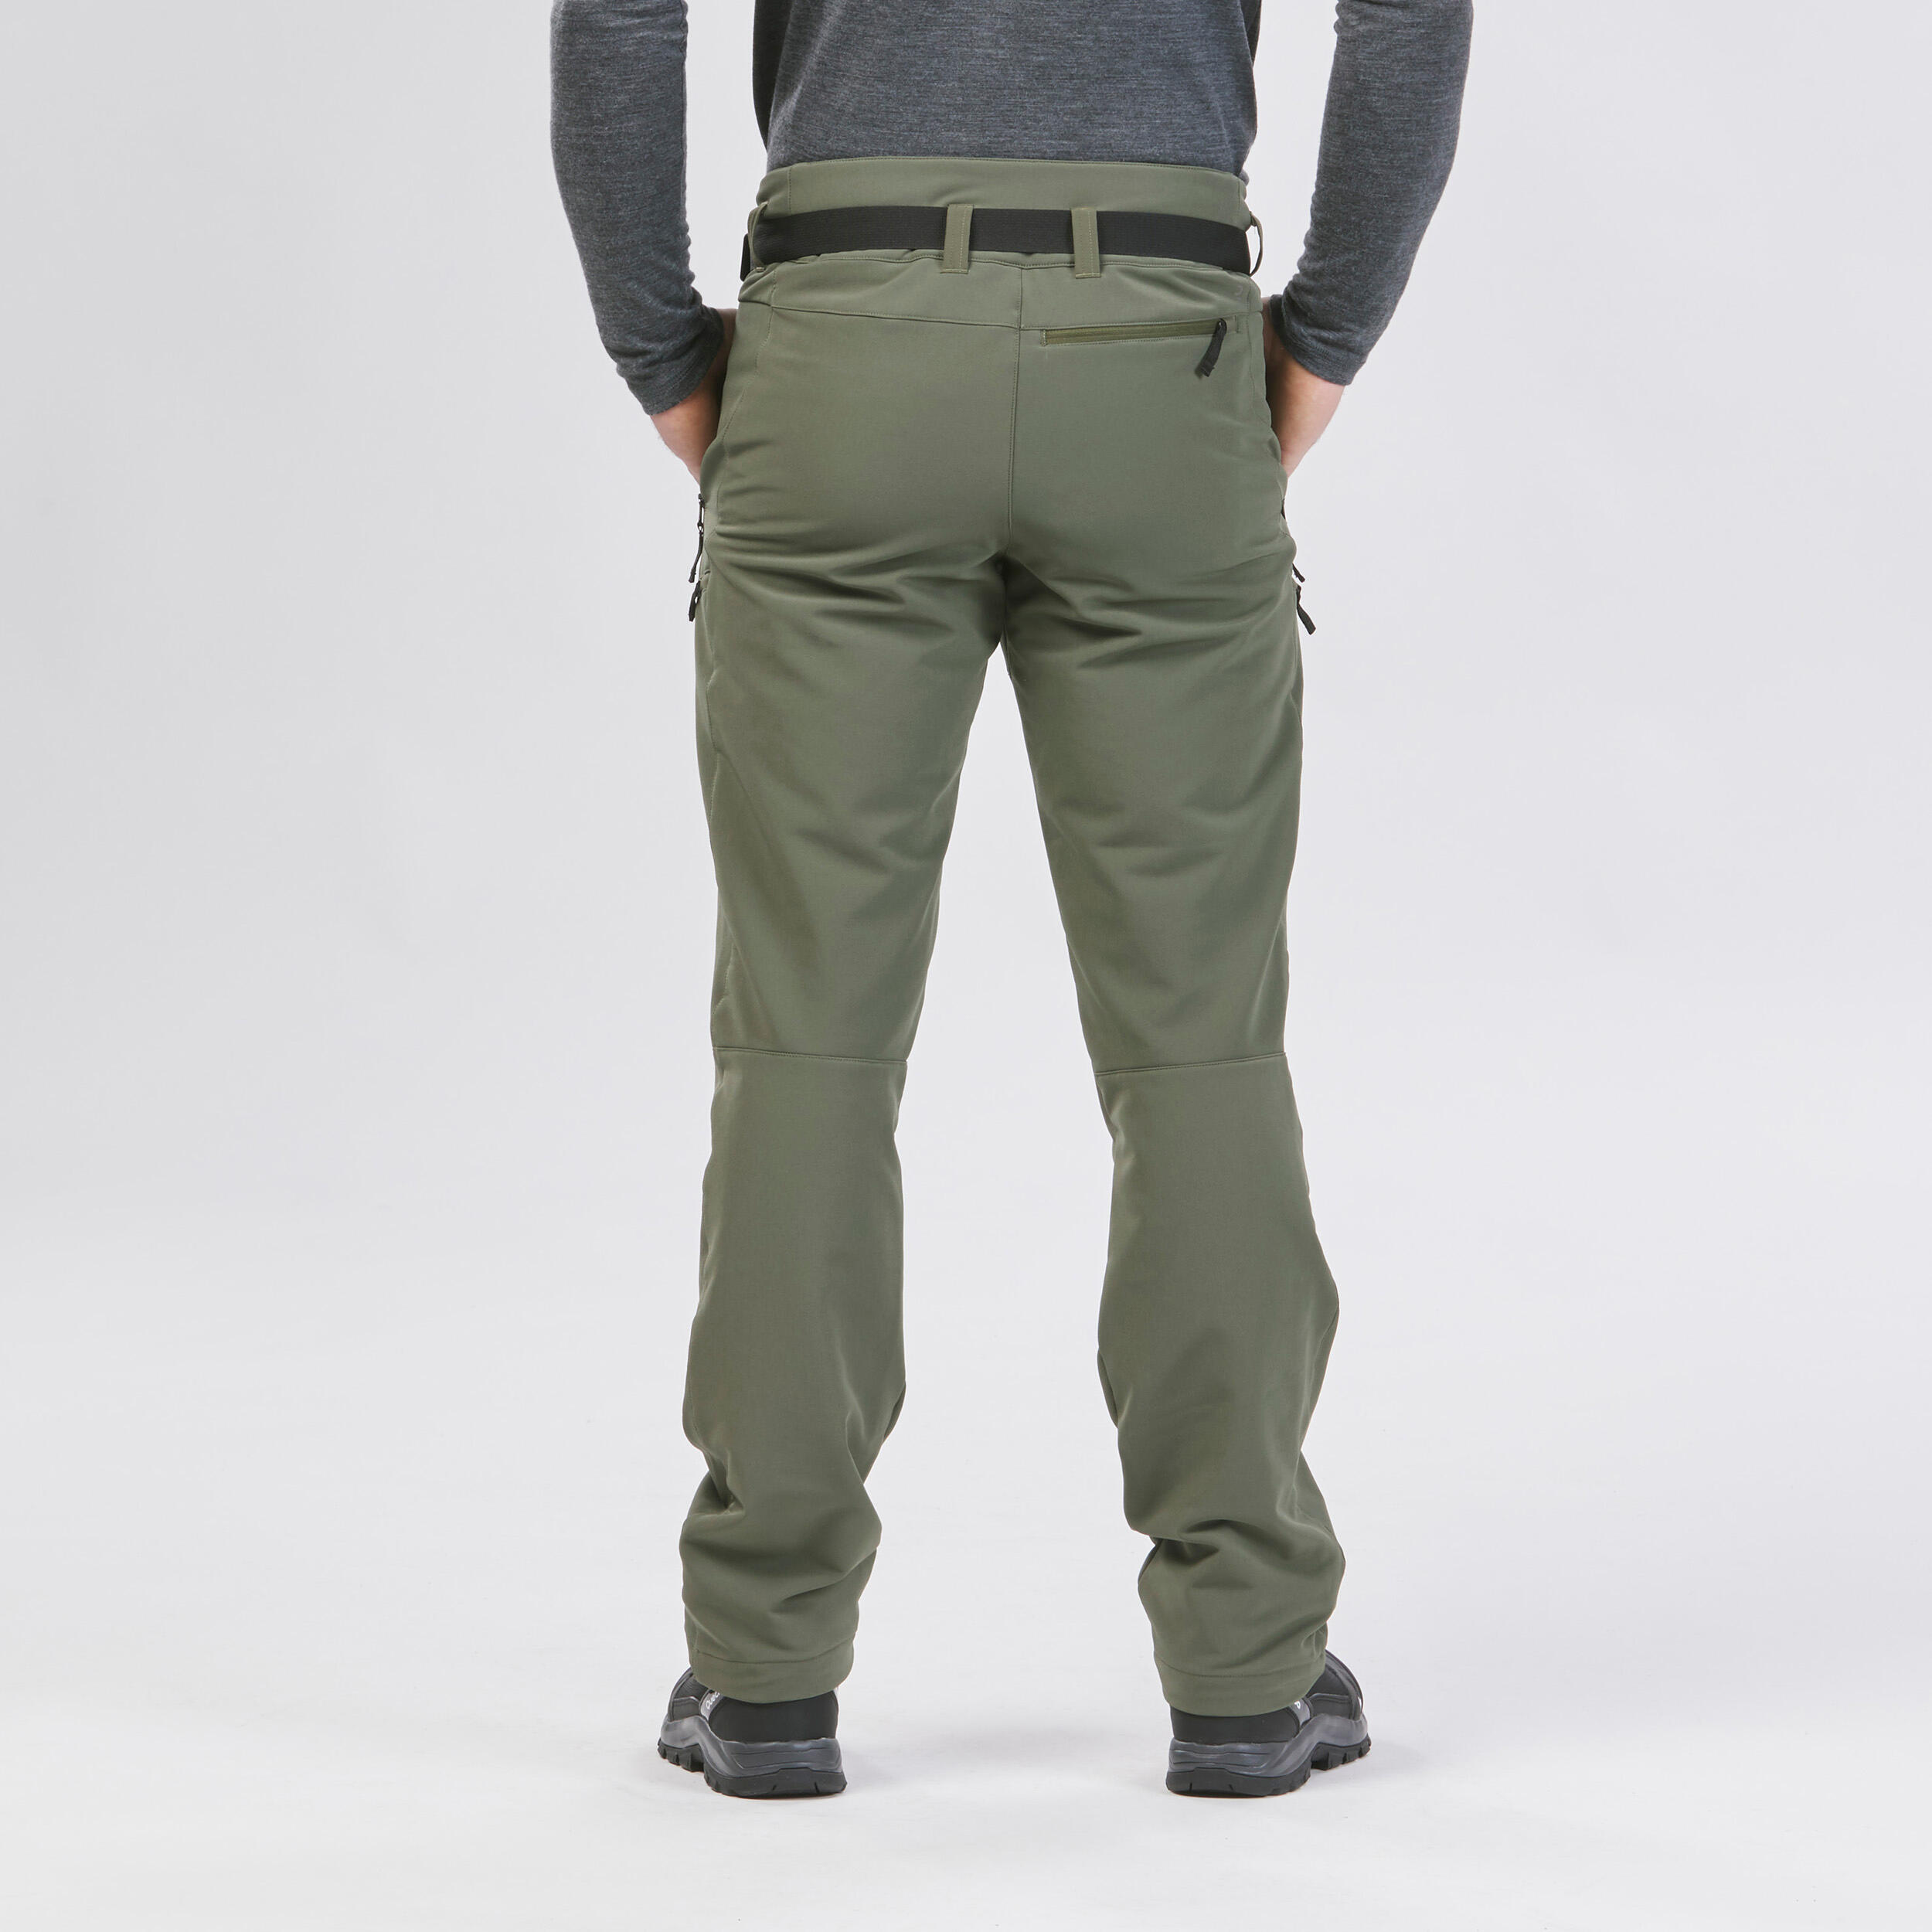 Decathlon official soft shell pants men's outdoor winter and